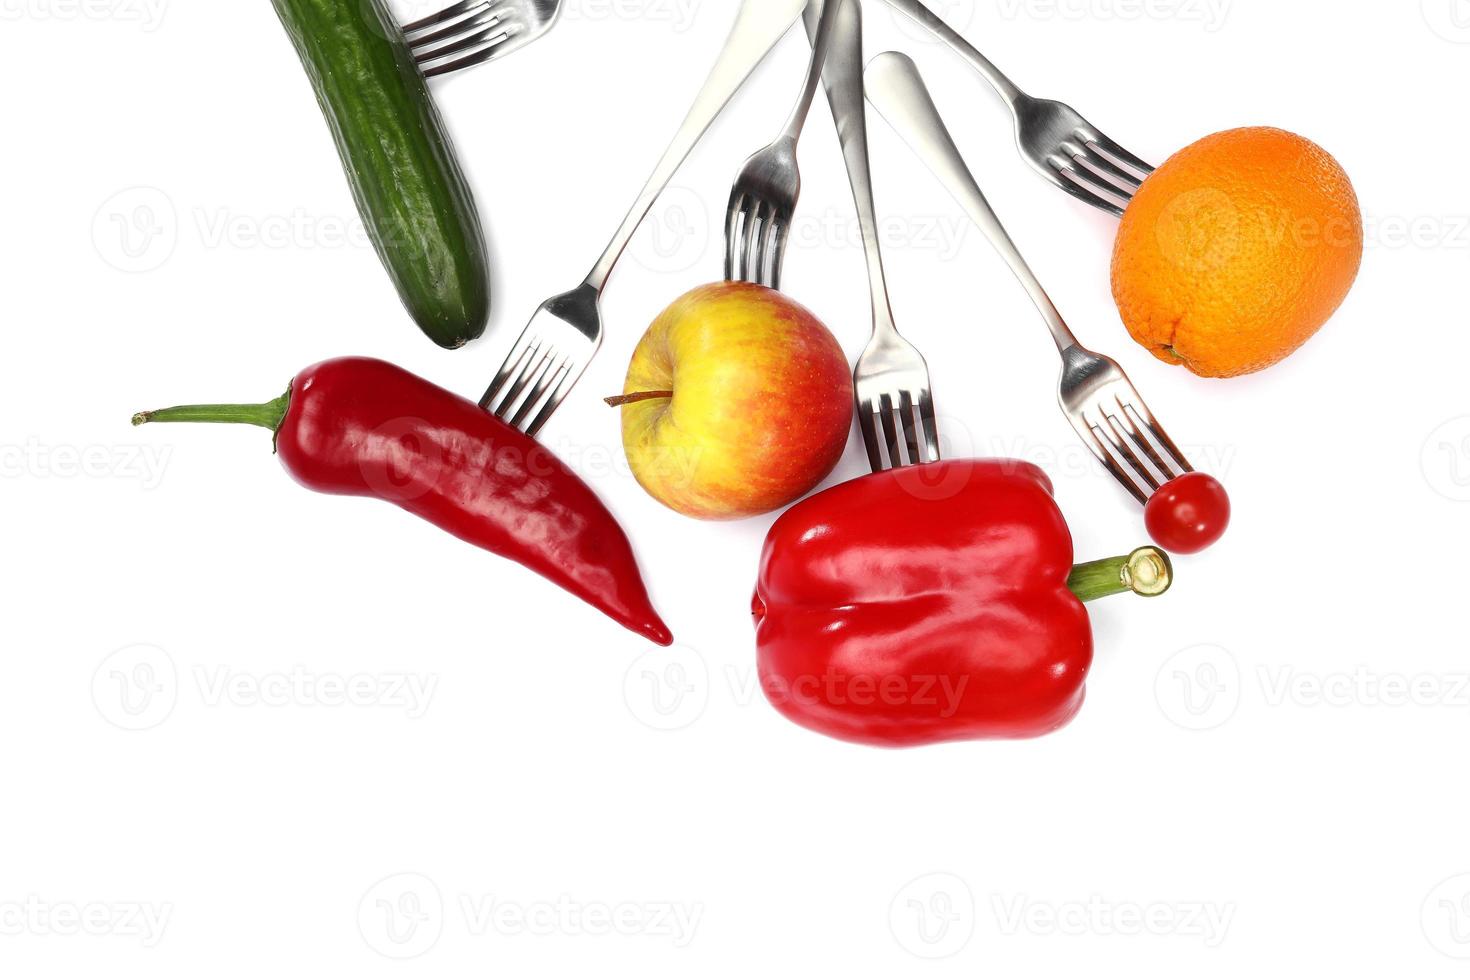 fresh cherry tomato, red pepper, cucumber, apple and orange fruits on forks on white background. Healthy eating and vegetarian food, cooking concept. photo